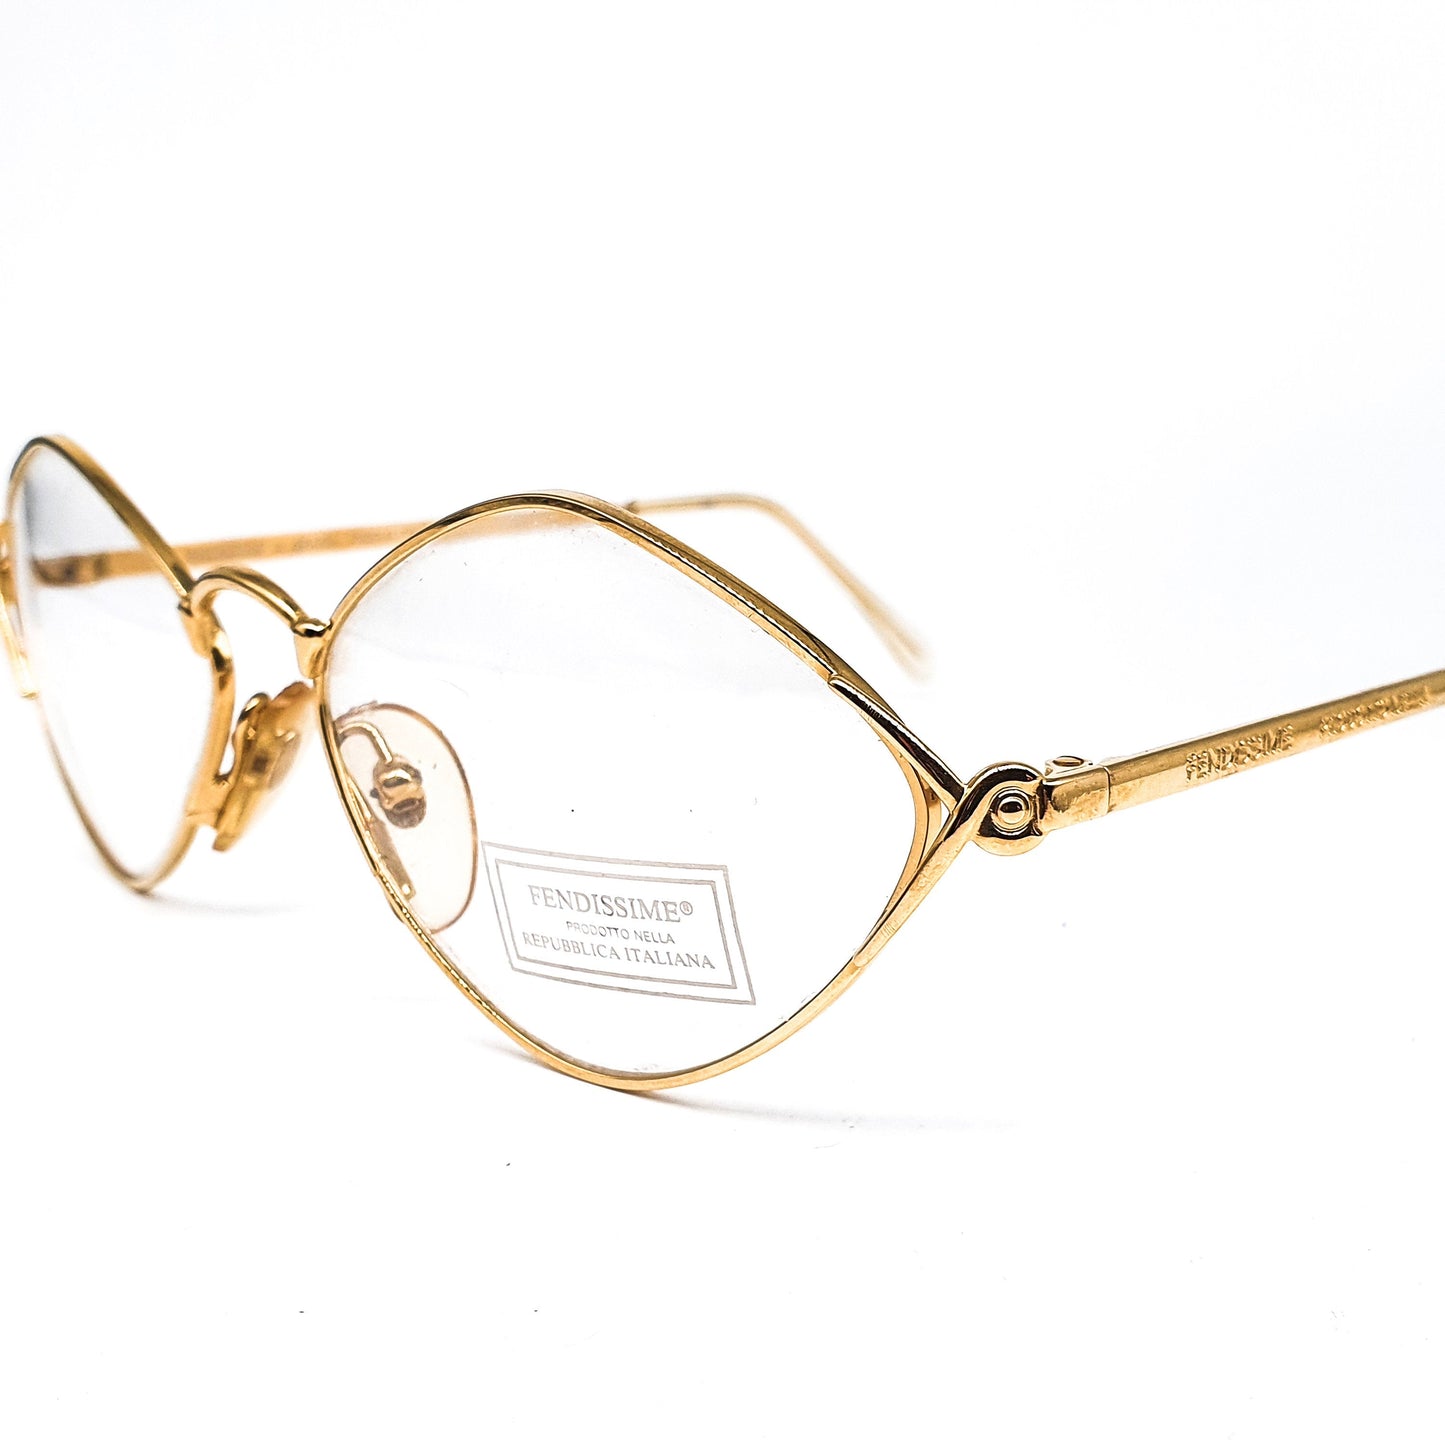 Fendi satin gold rhombus shaped frames, coolest minimalist design made in Italy, 1990s NOs